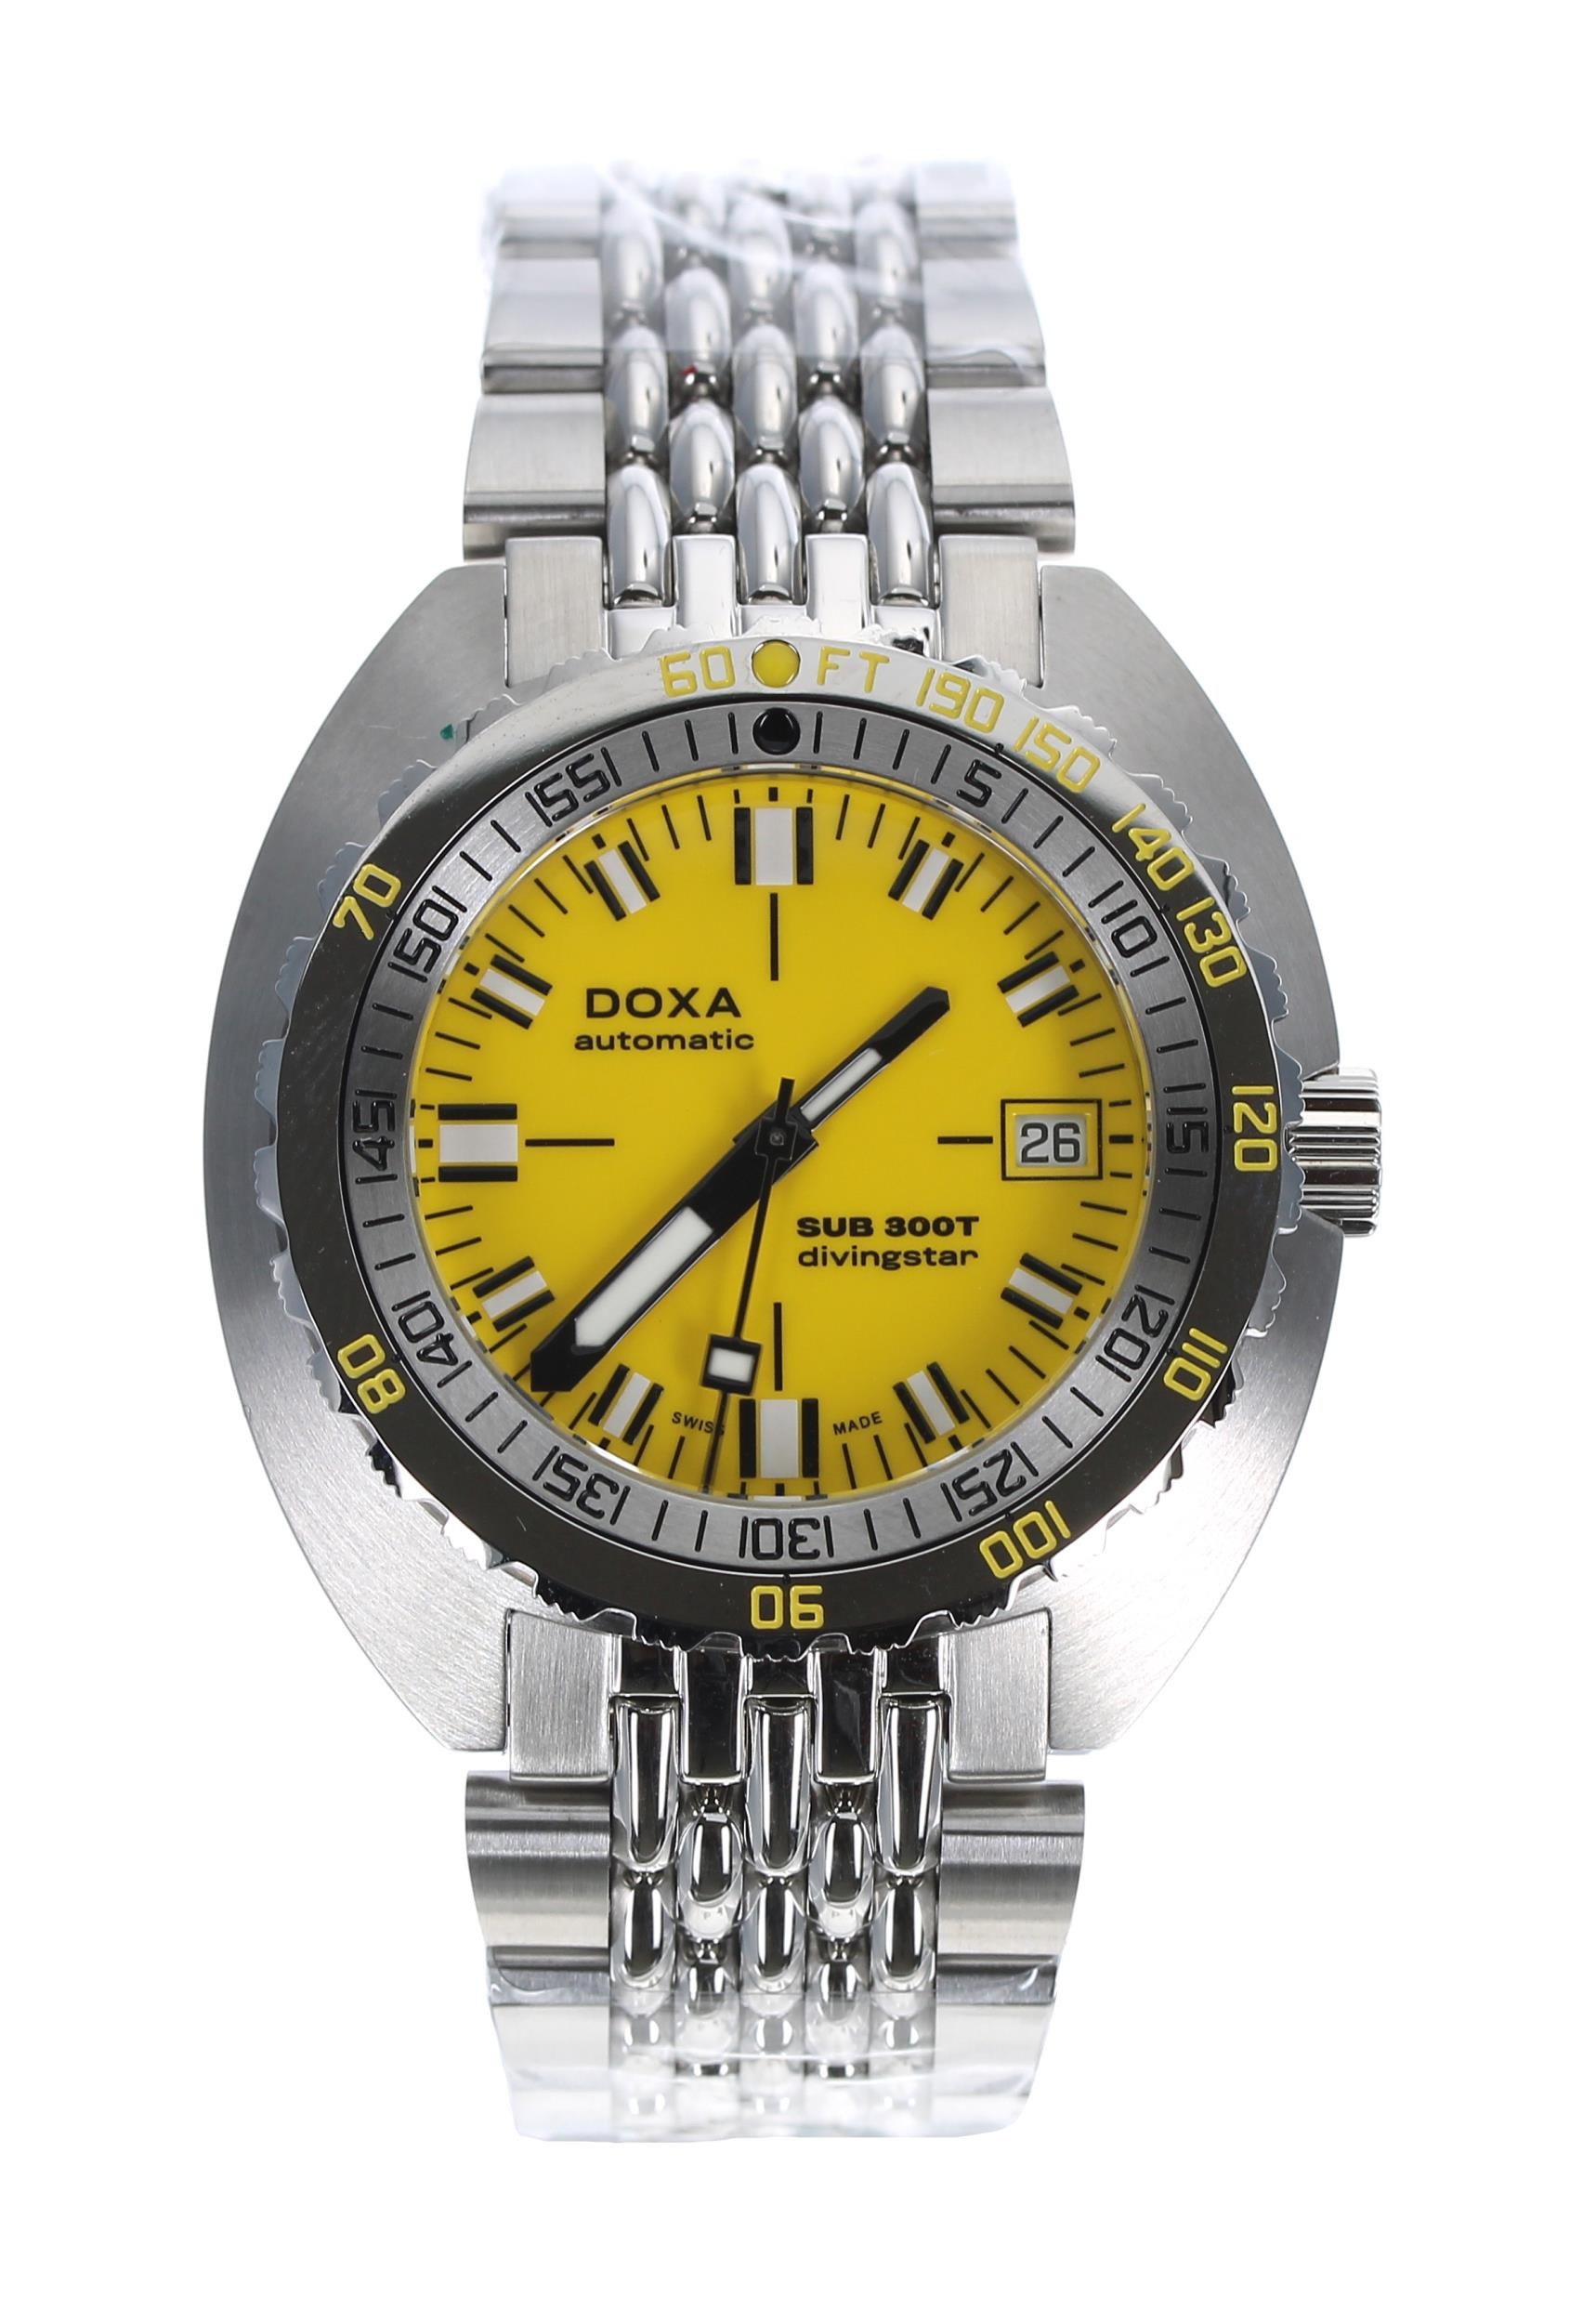 Doxa Sub 300T Divingstar automatic stainless steel diver's wristwatch, reference no. 879.10.361.